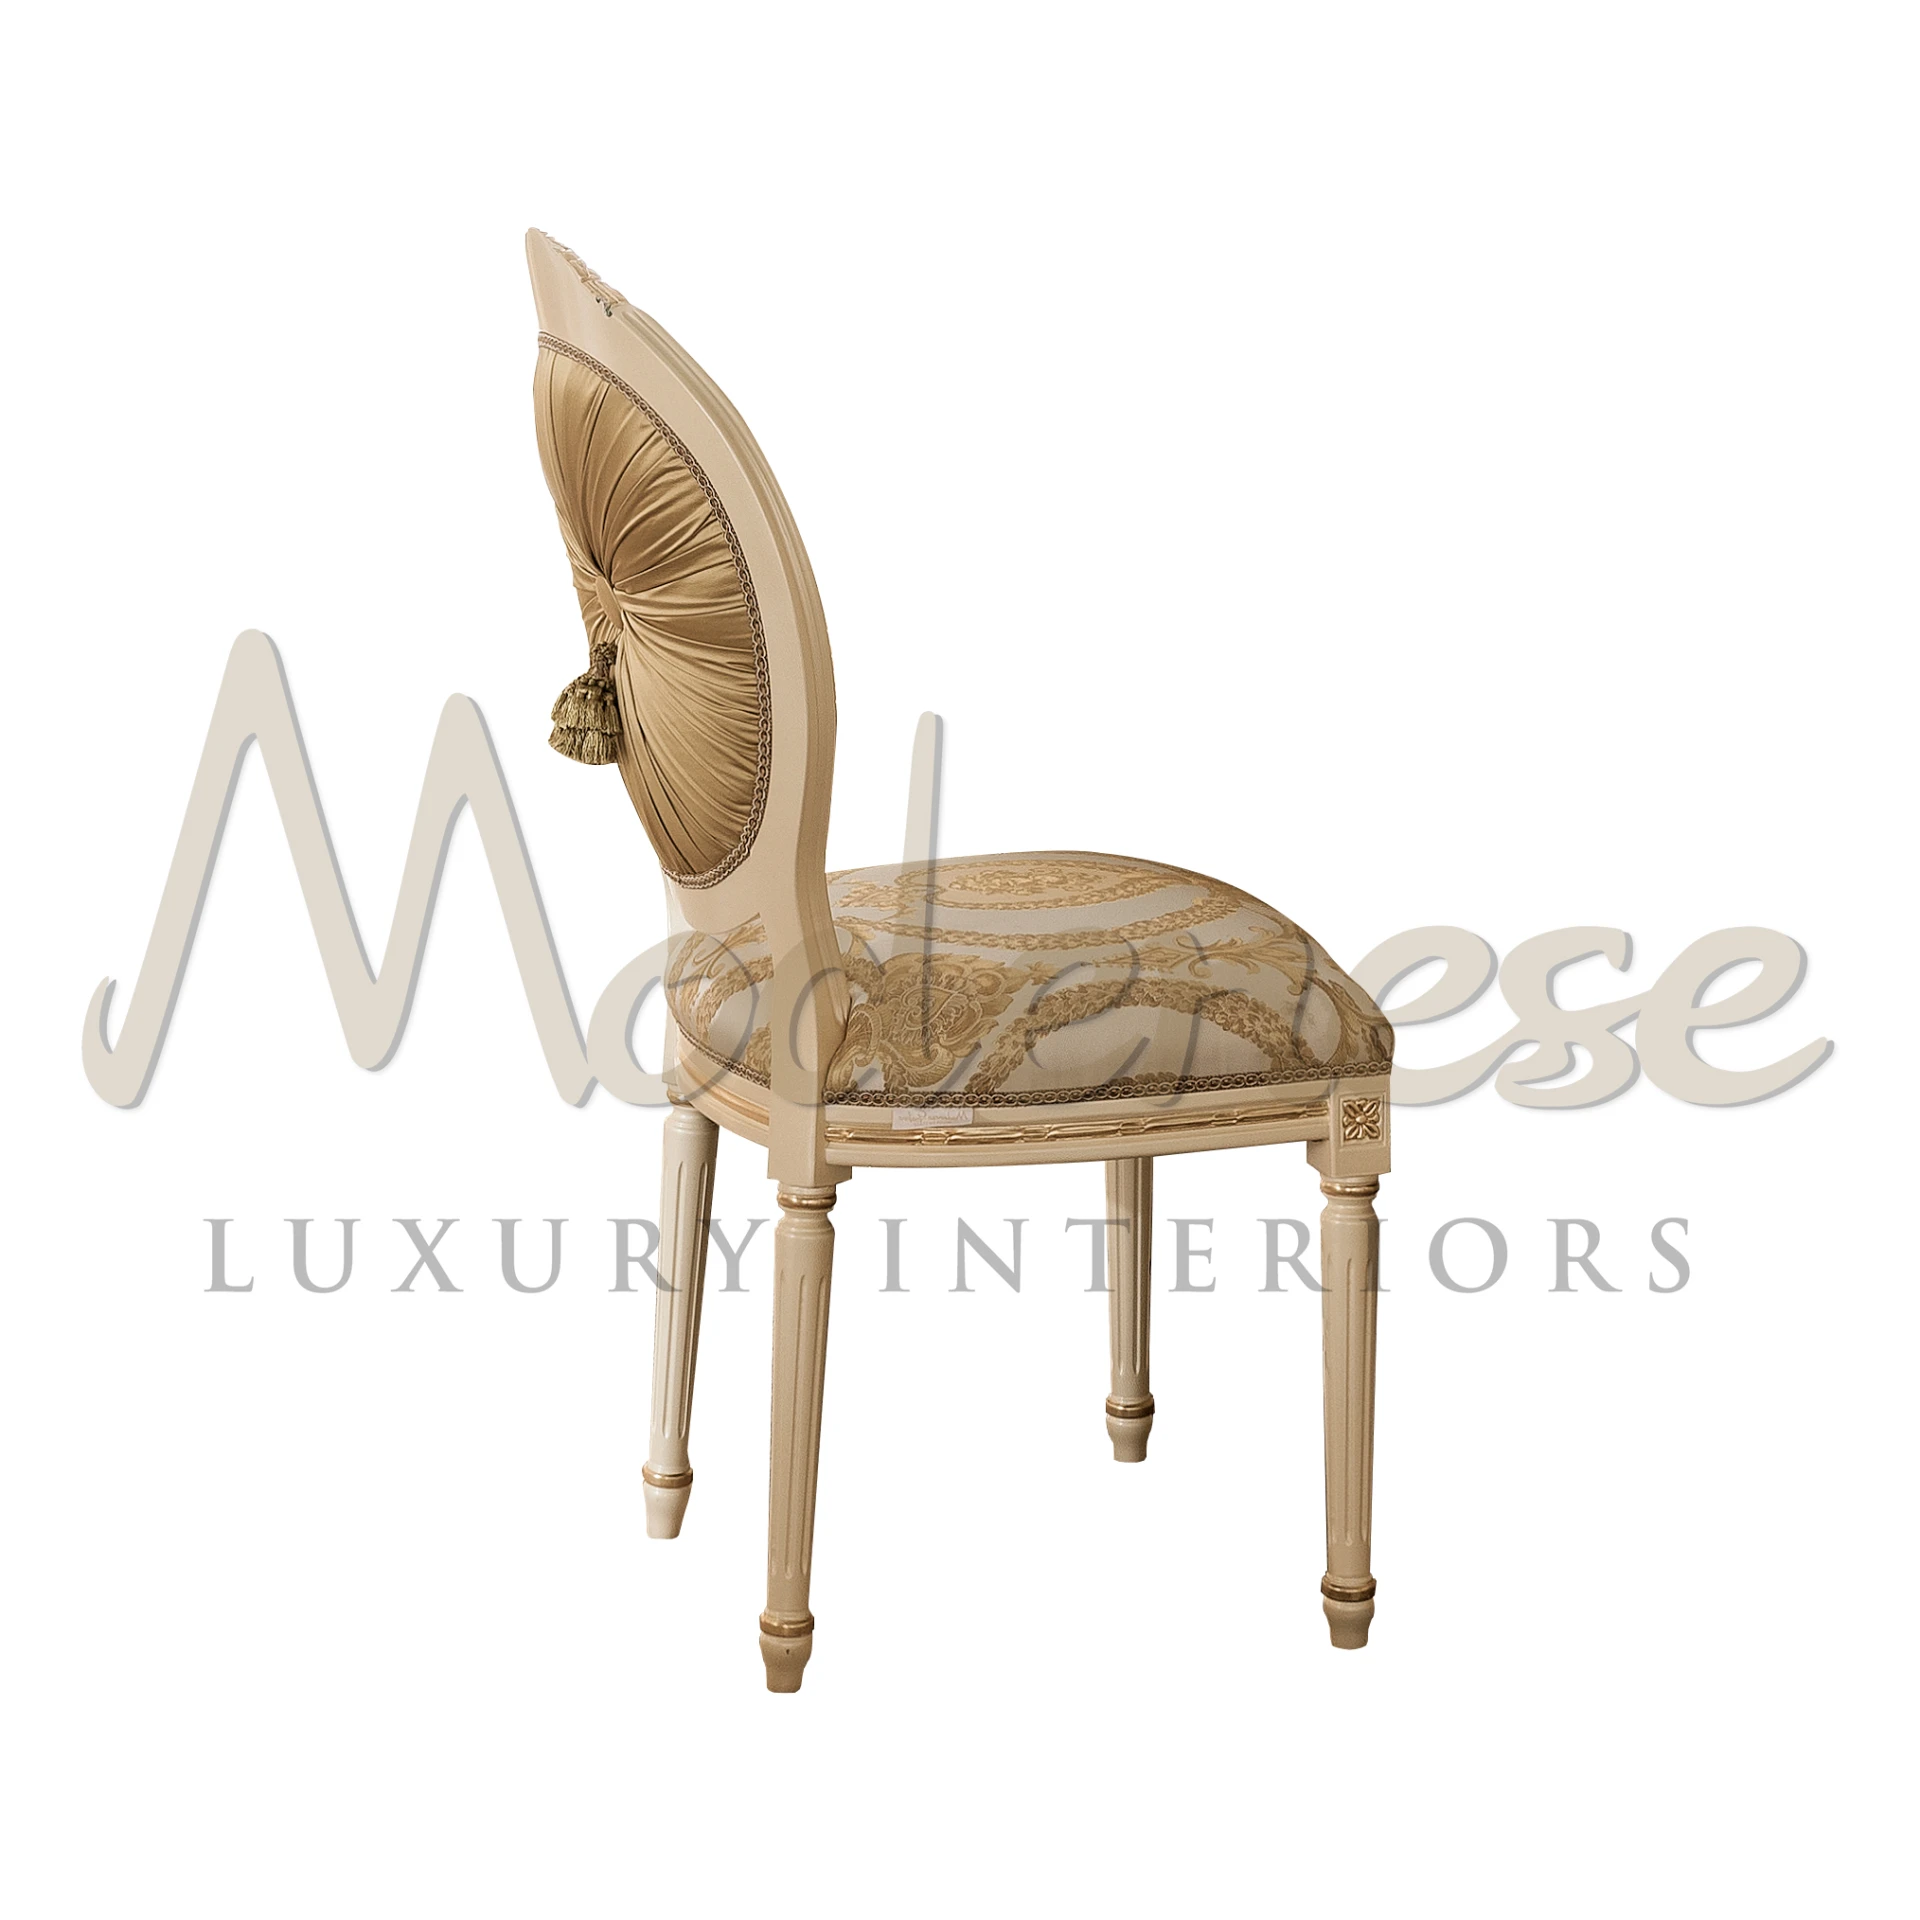 Crafted by Modenese Furniture, solid wood frame, plush upholstery in patterned fabric, adorned with elegant plated backrest from the Imperial collection.